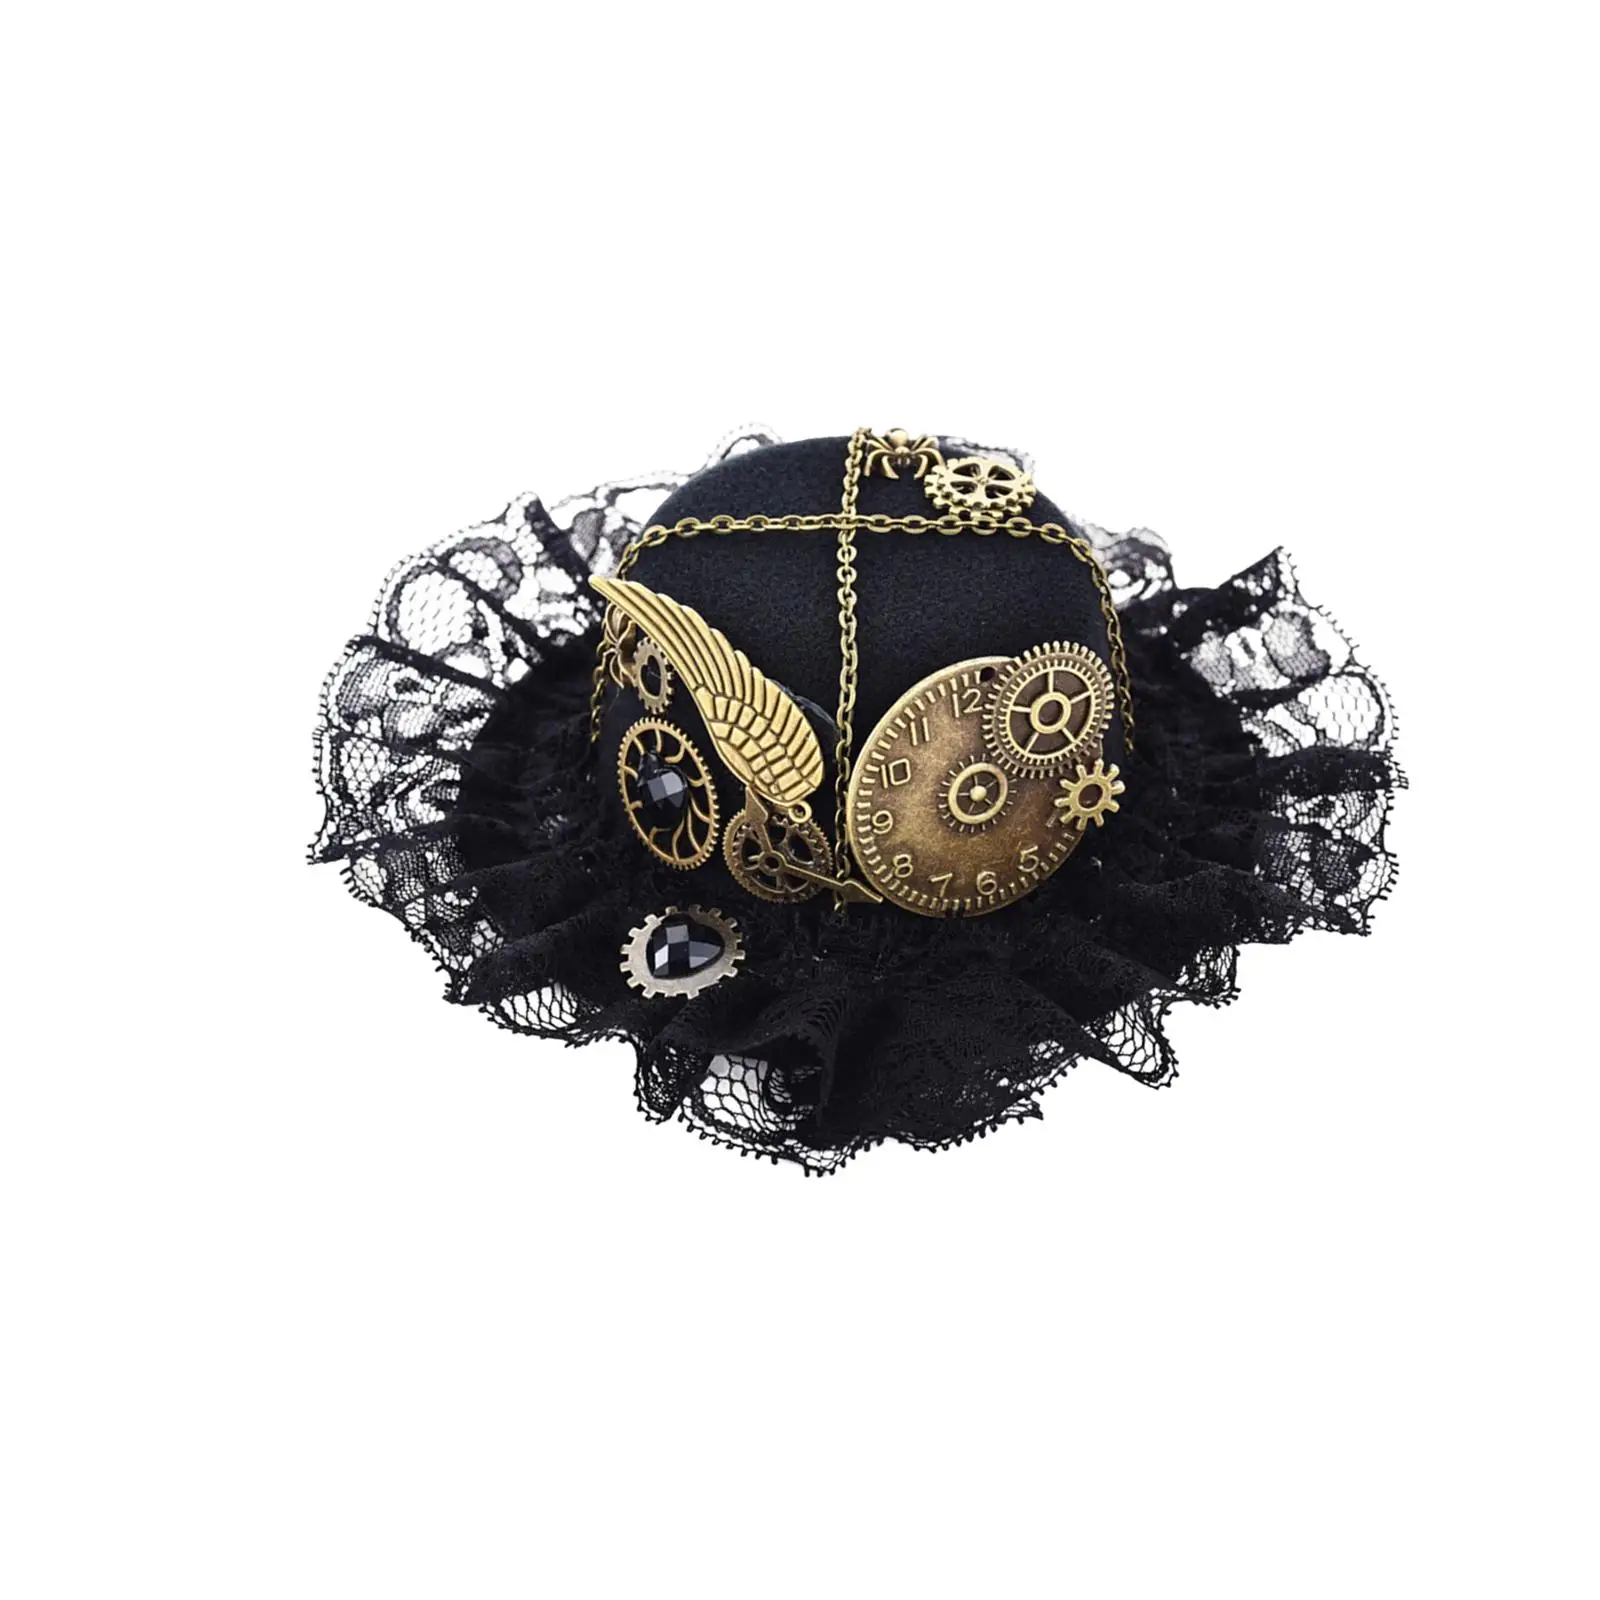 Vintage Style Steampunk Top Hat Hair Clip Black for Women Halloween Cocktail